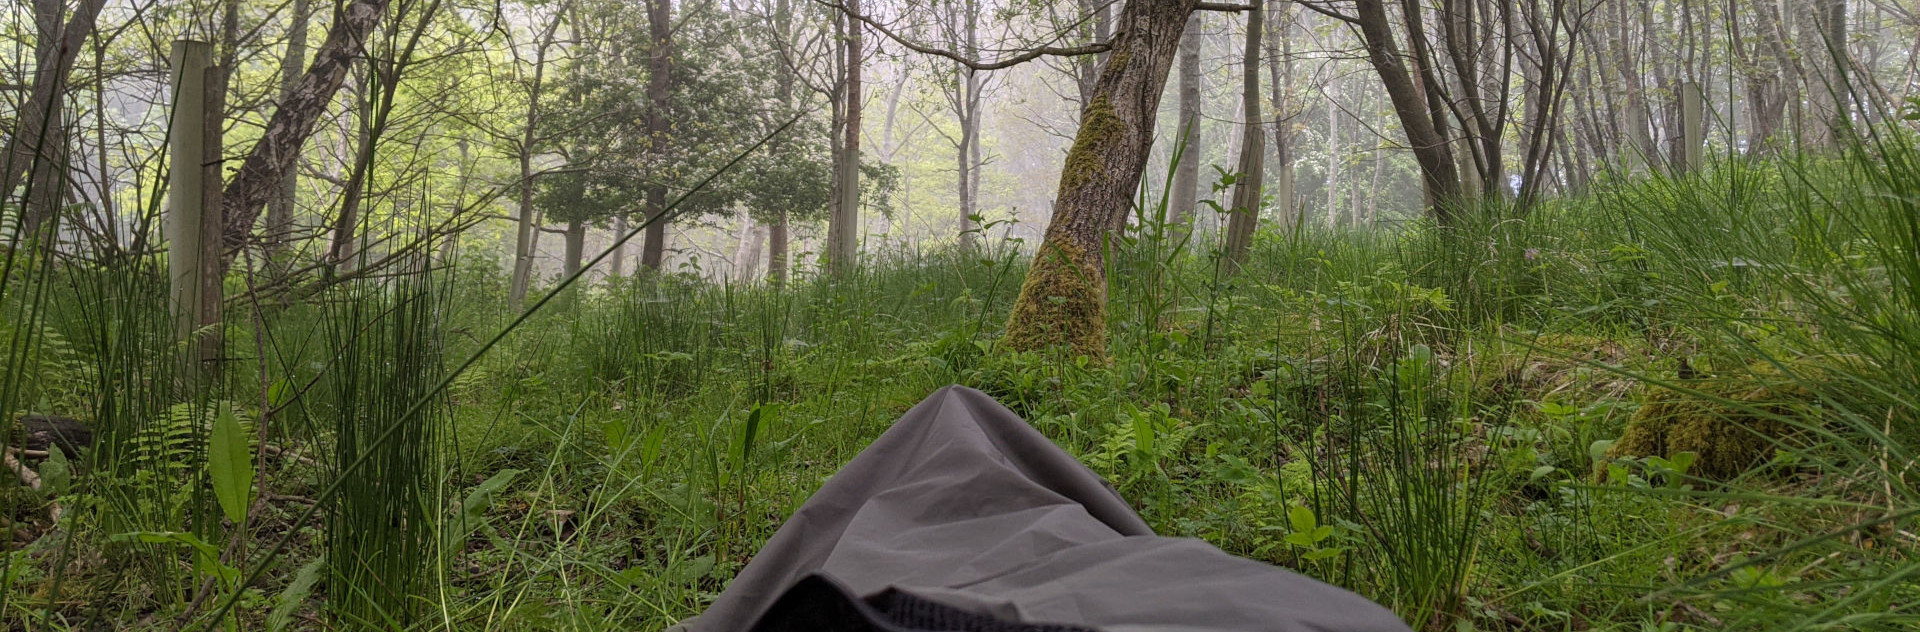 A picture of the wood shortly after dawn. The end of my sleeping bivvy bag is in frame.